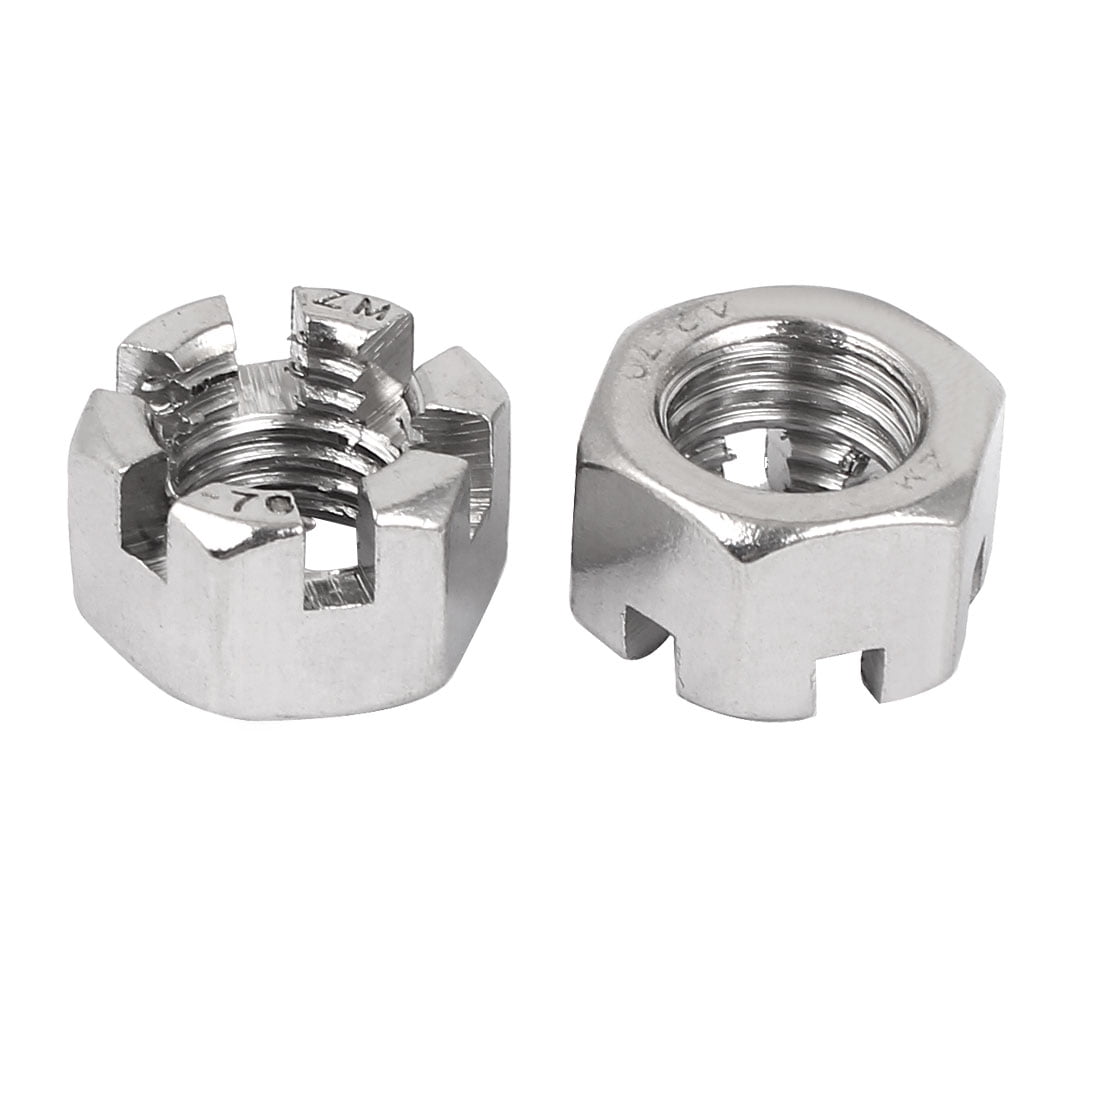 M14-1.5 Slotted Hex Castle Nut Zinc Plated 14mm Fine Thread nuts 10 